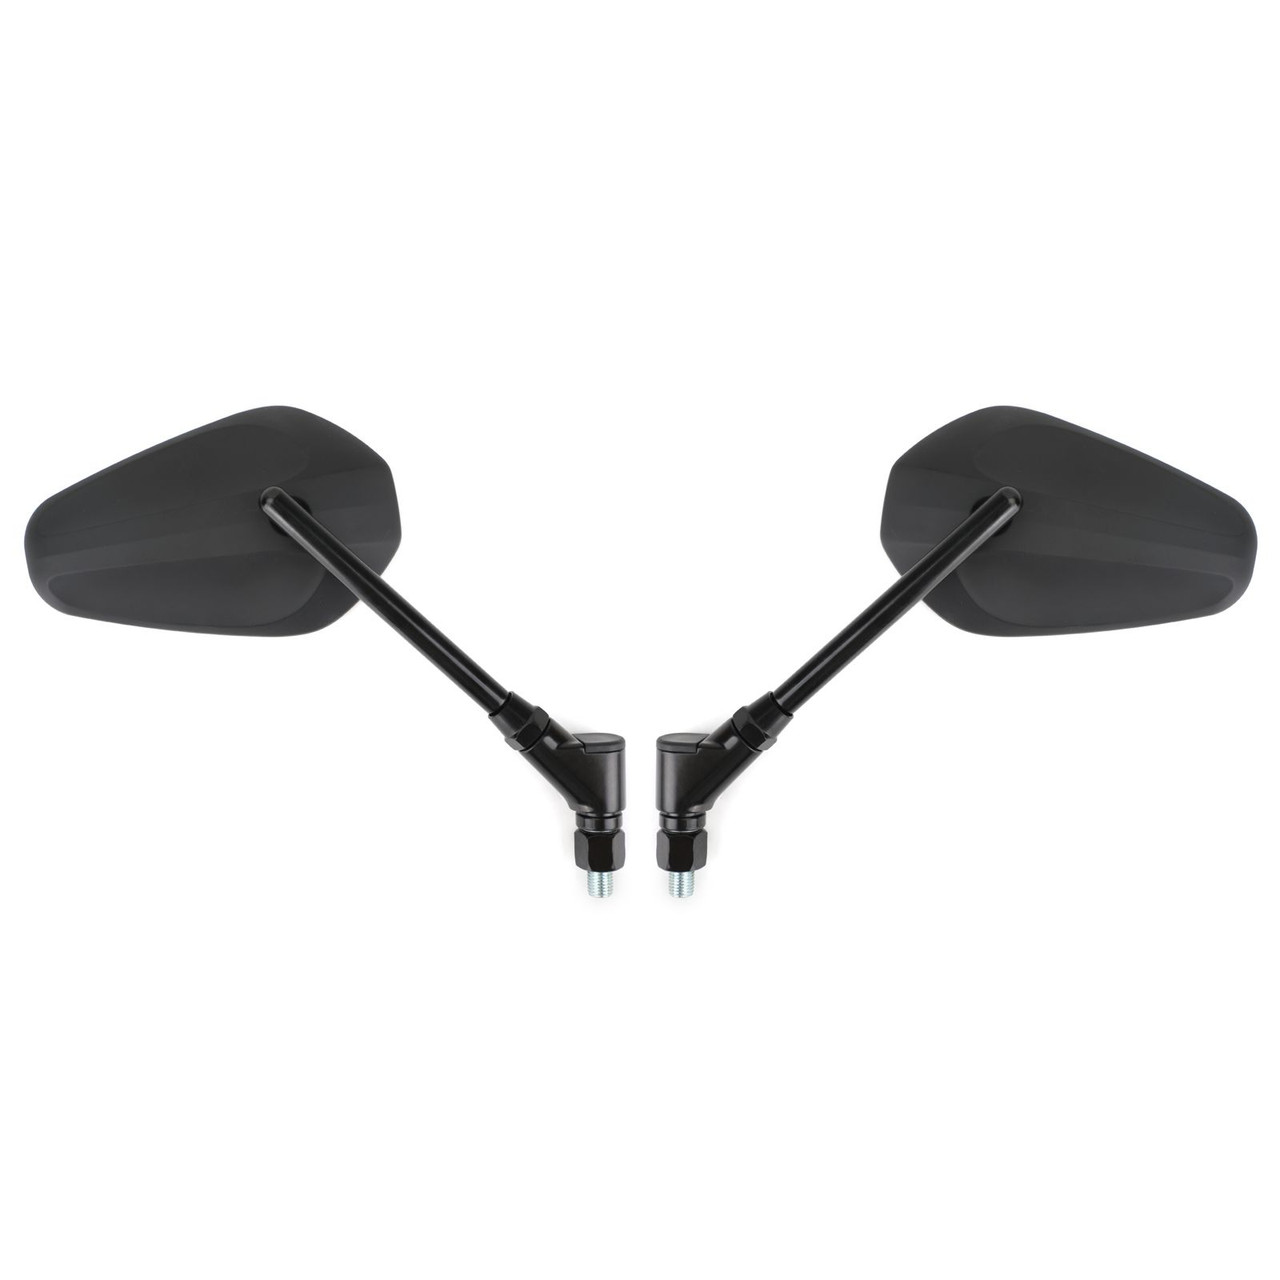 Pair M10x1.25 Stainless Steel Stem Rearview Side Mirrors Fit for Motorcycle Moped Scooter Quad ATV UNIVERSAL Black